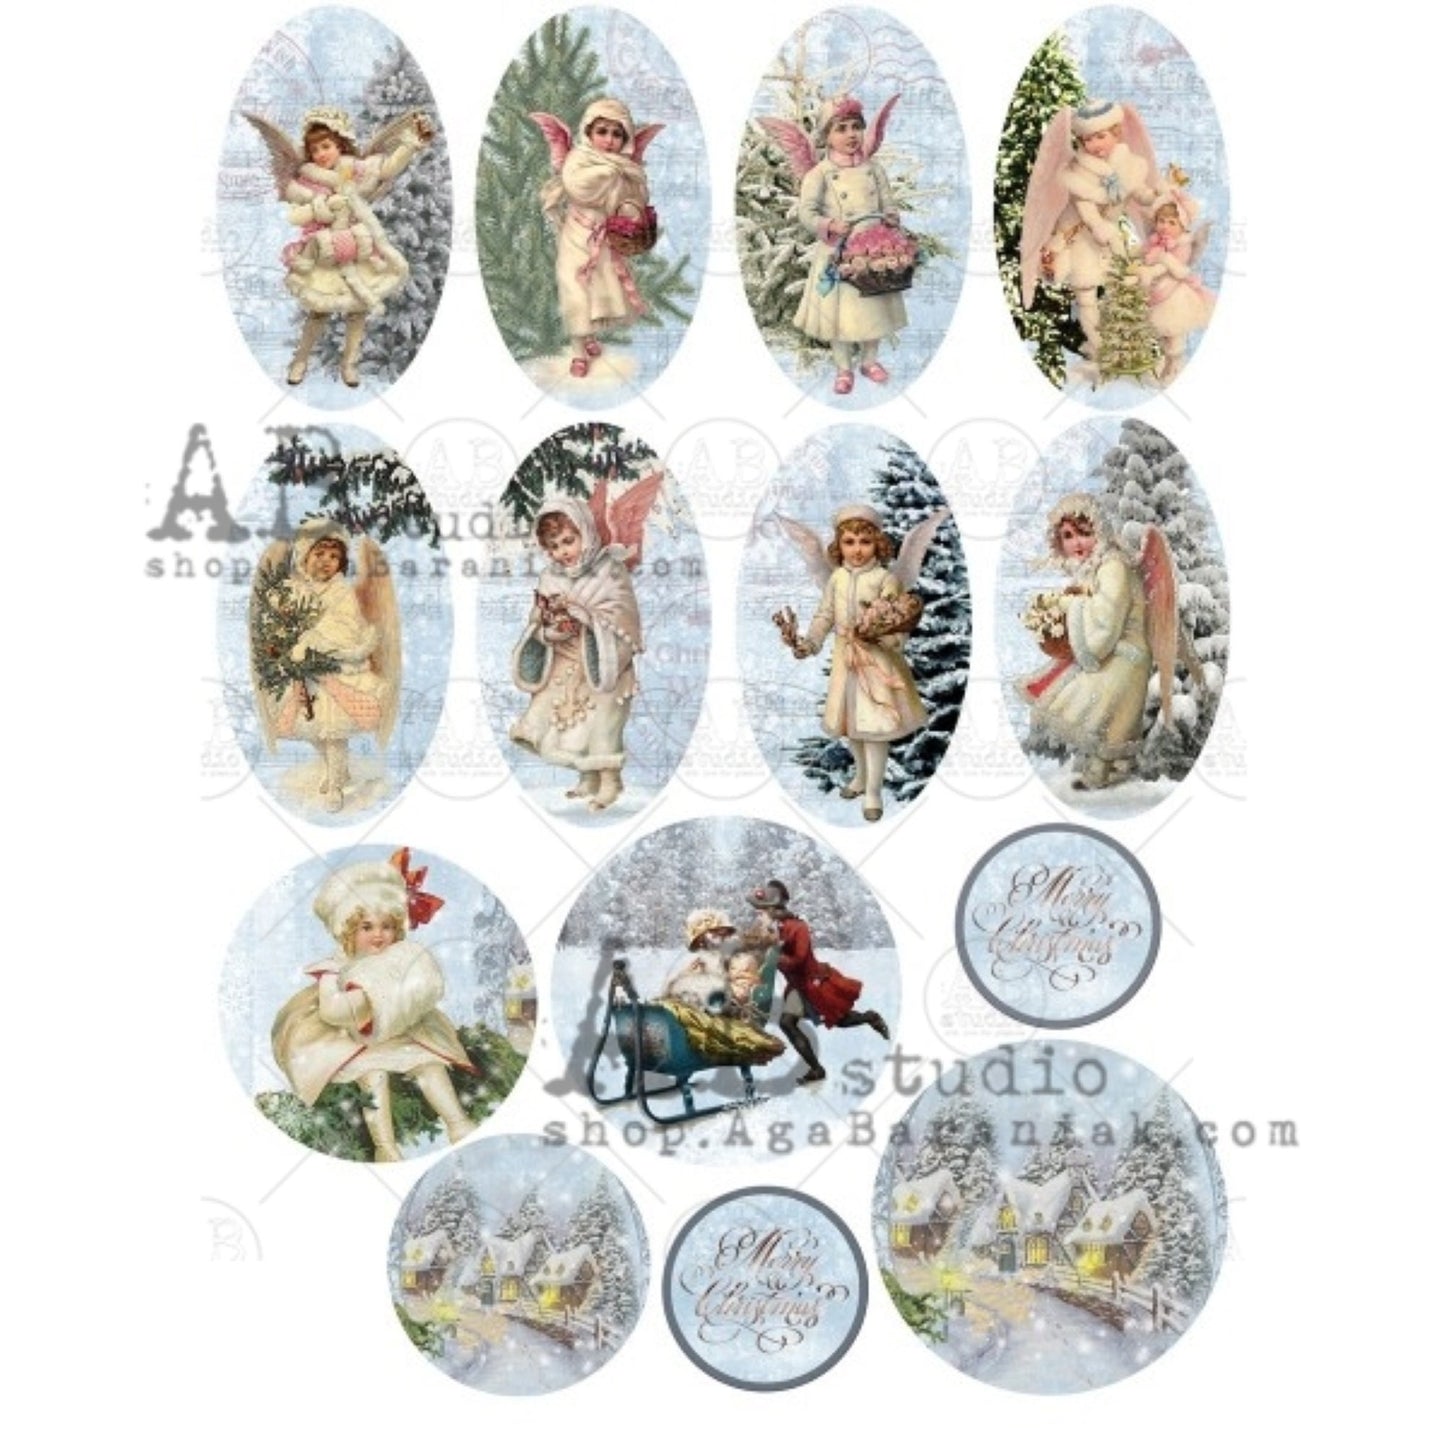 AB Studio Christmas Vintage Children Angels #0453 Size: A4 - 8.27 X 11.69 inches Rice Paper for Decoupage Imported from Poland